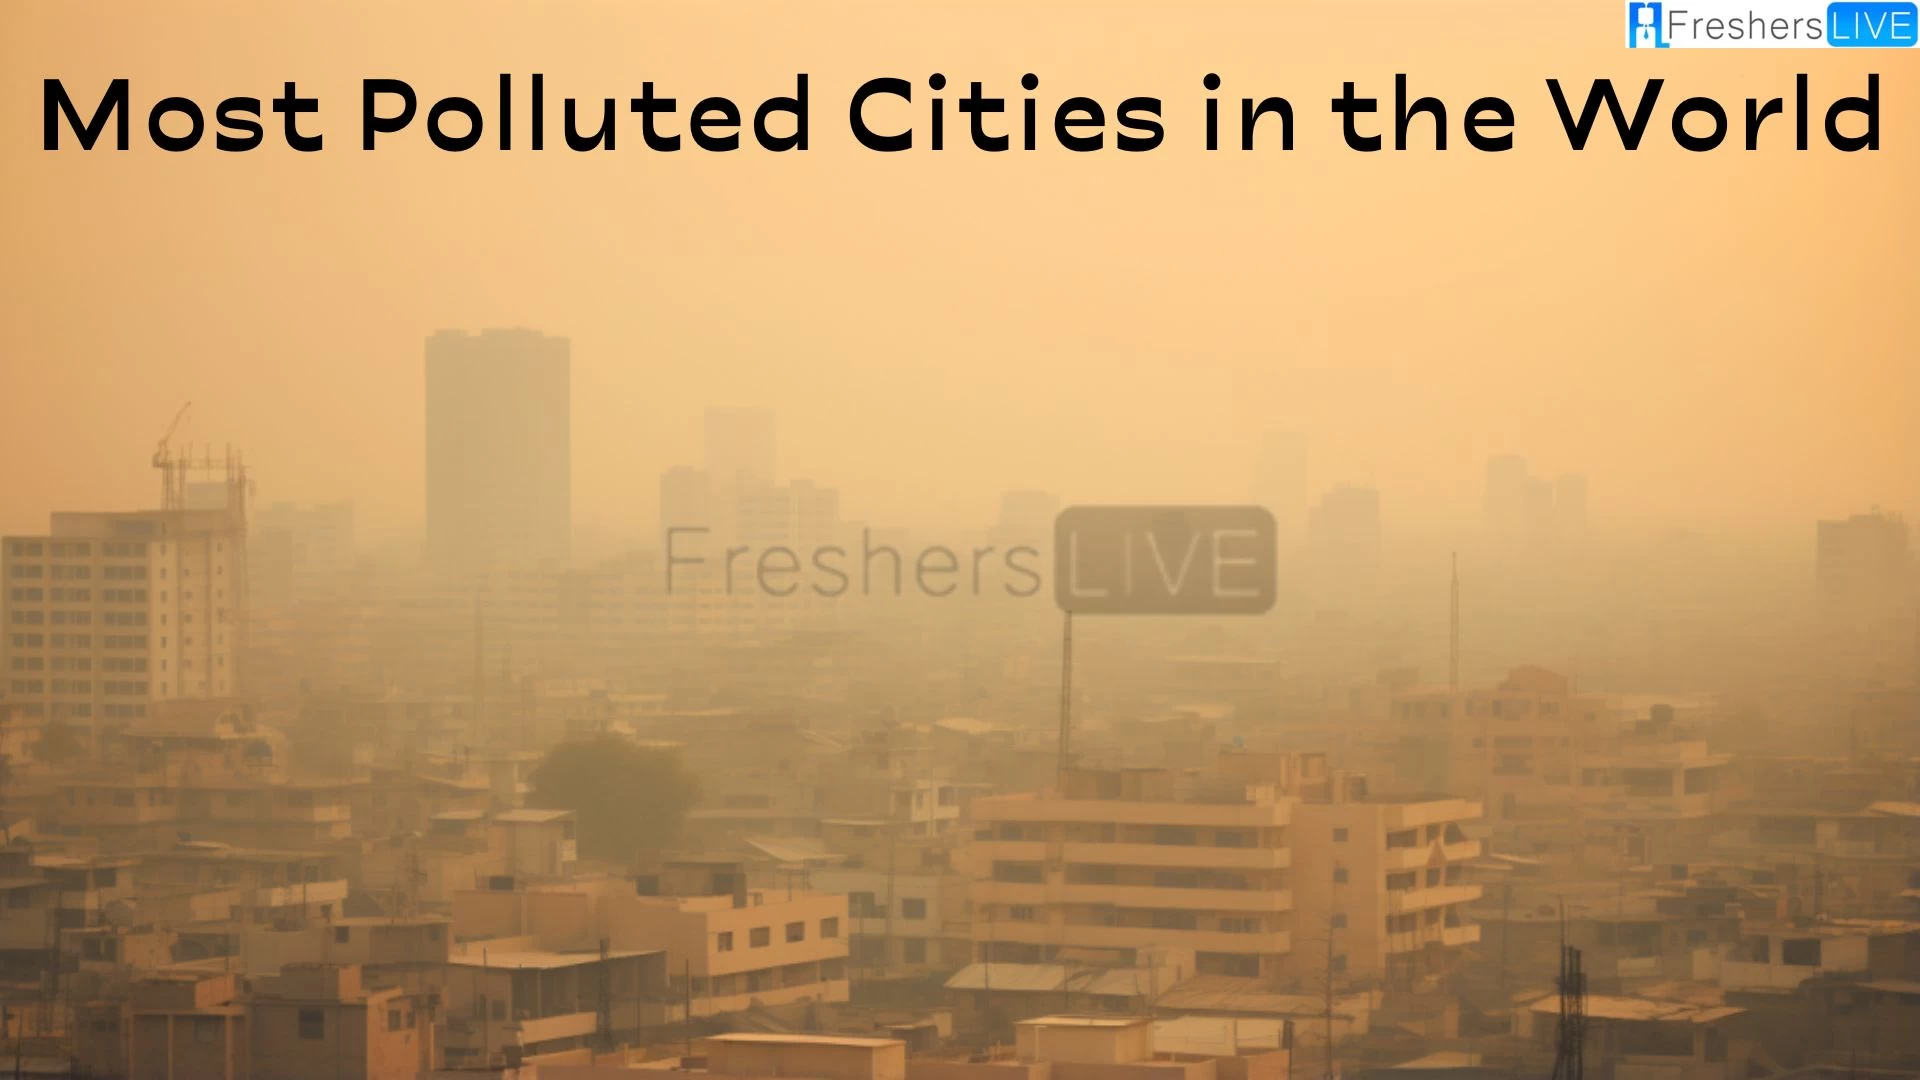 Top 10 Most Polluted Cities in the World - Breathing on the Edge